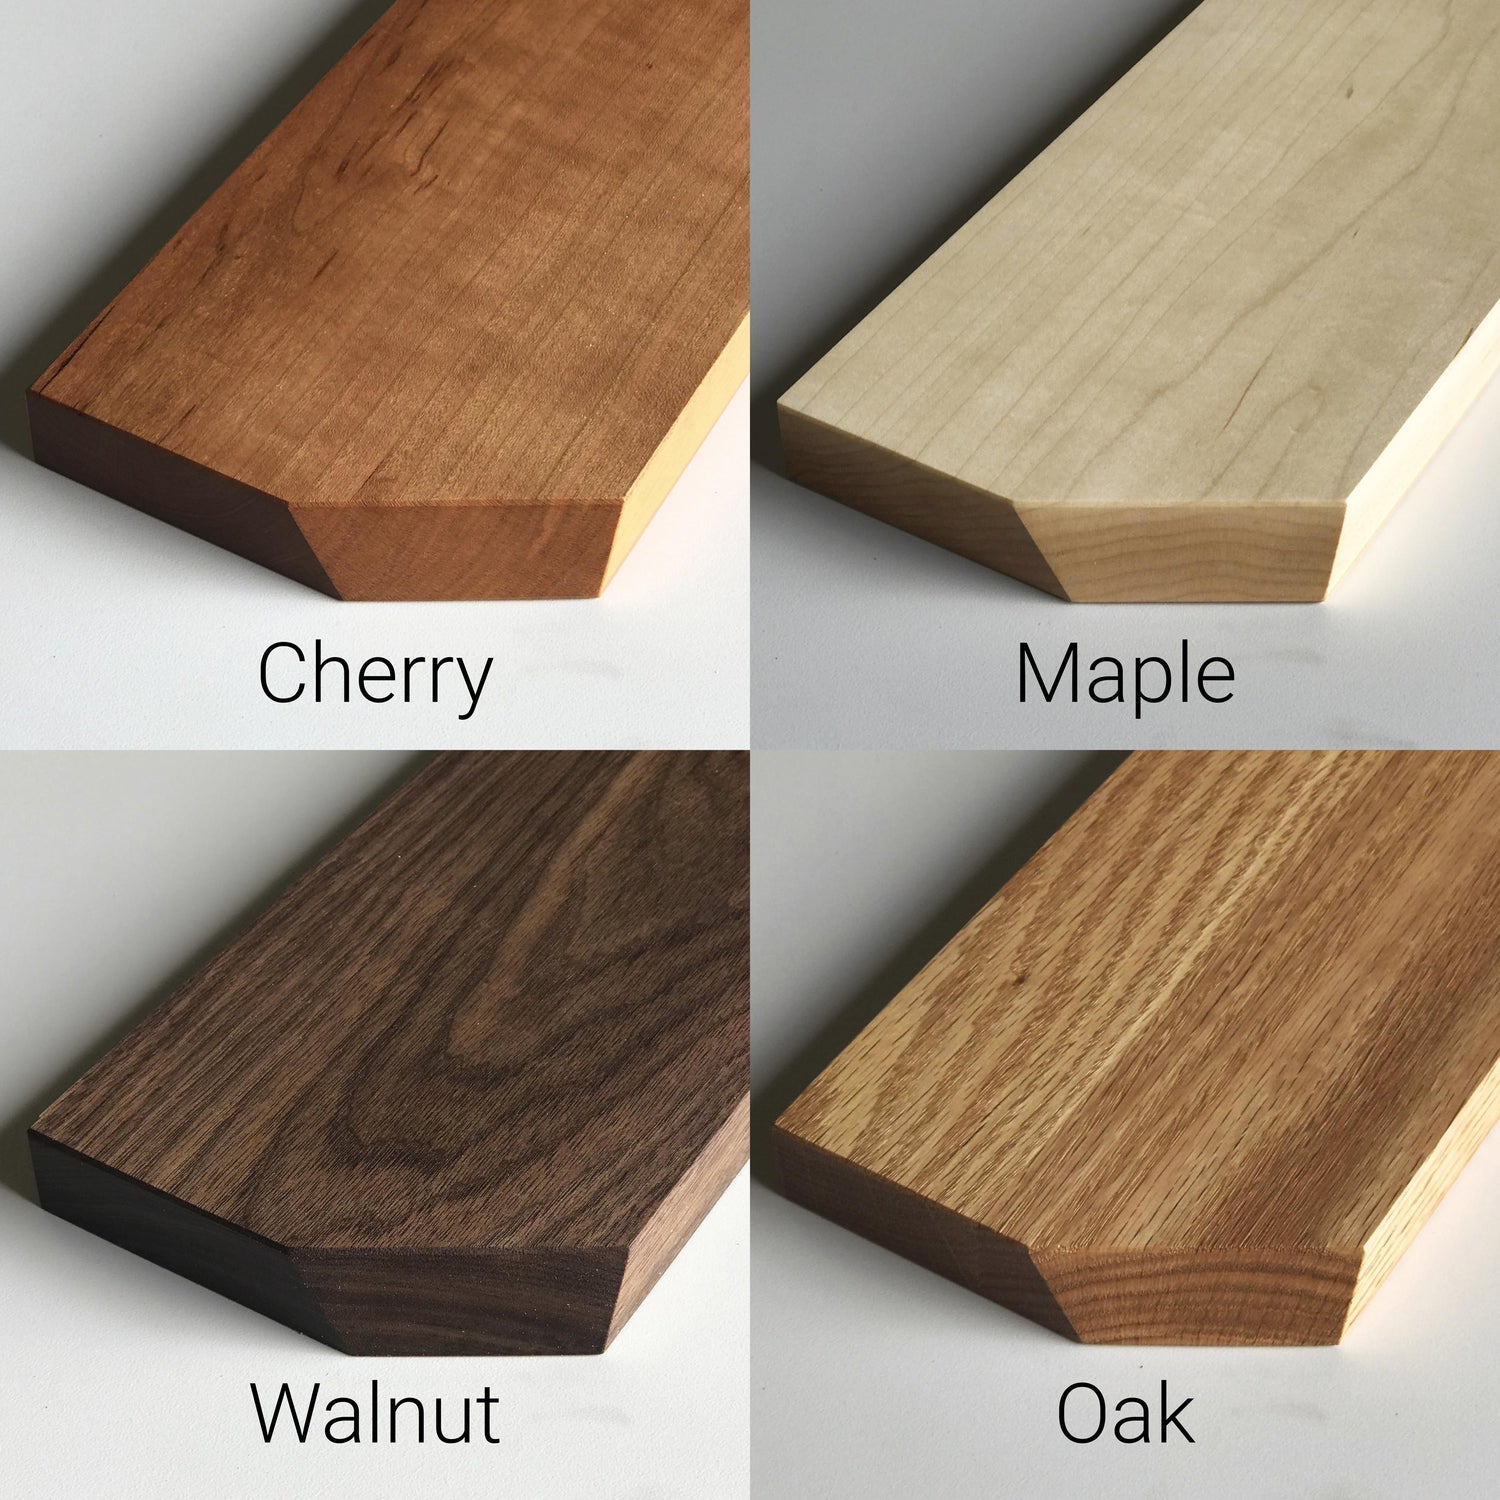 Solid wood samples for organic furniture - cherry, maple, walnut, and oak